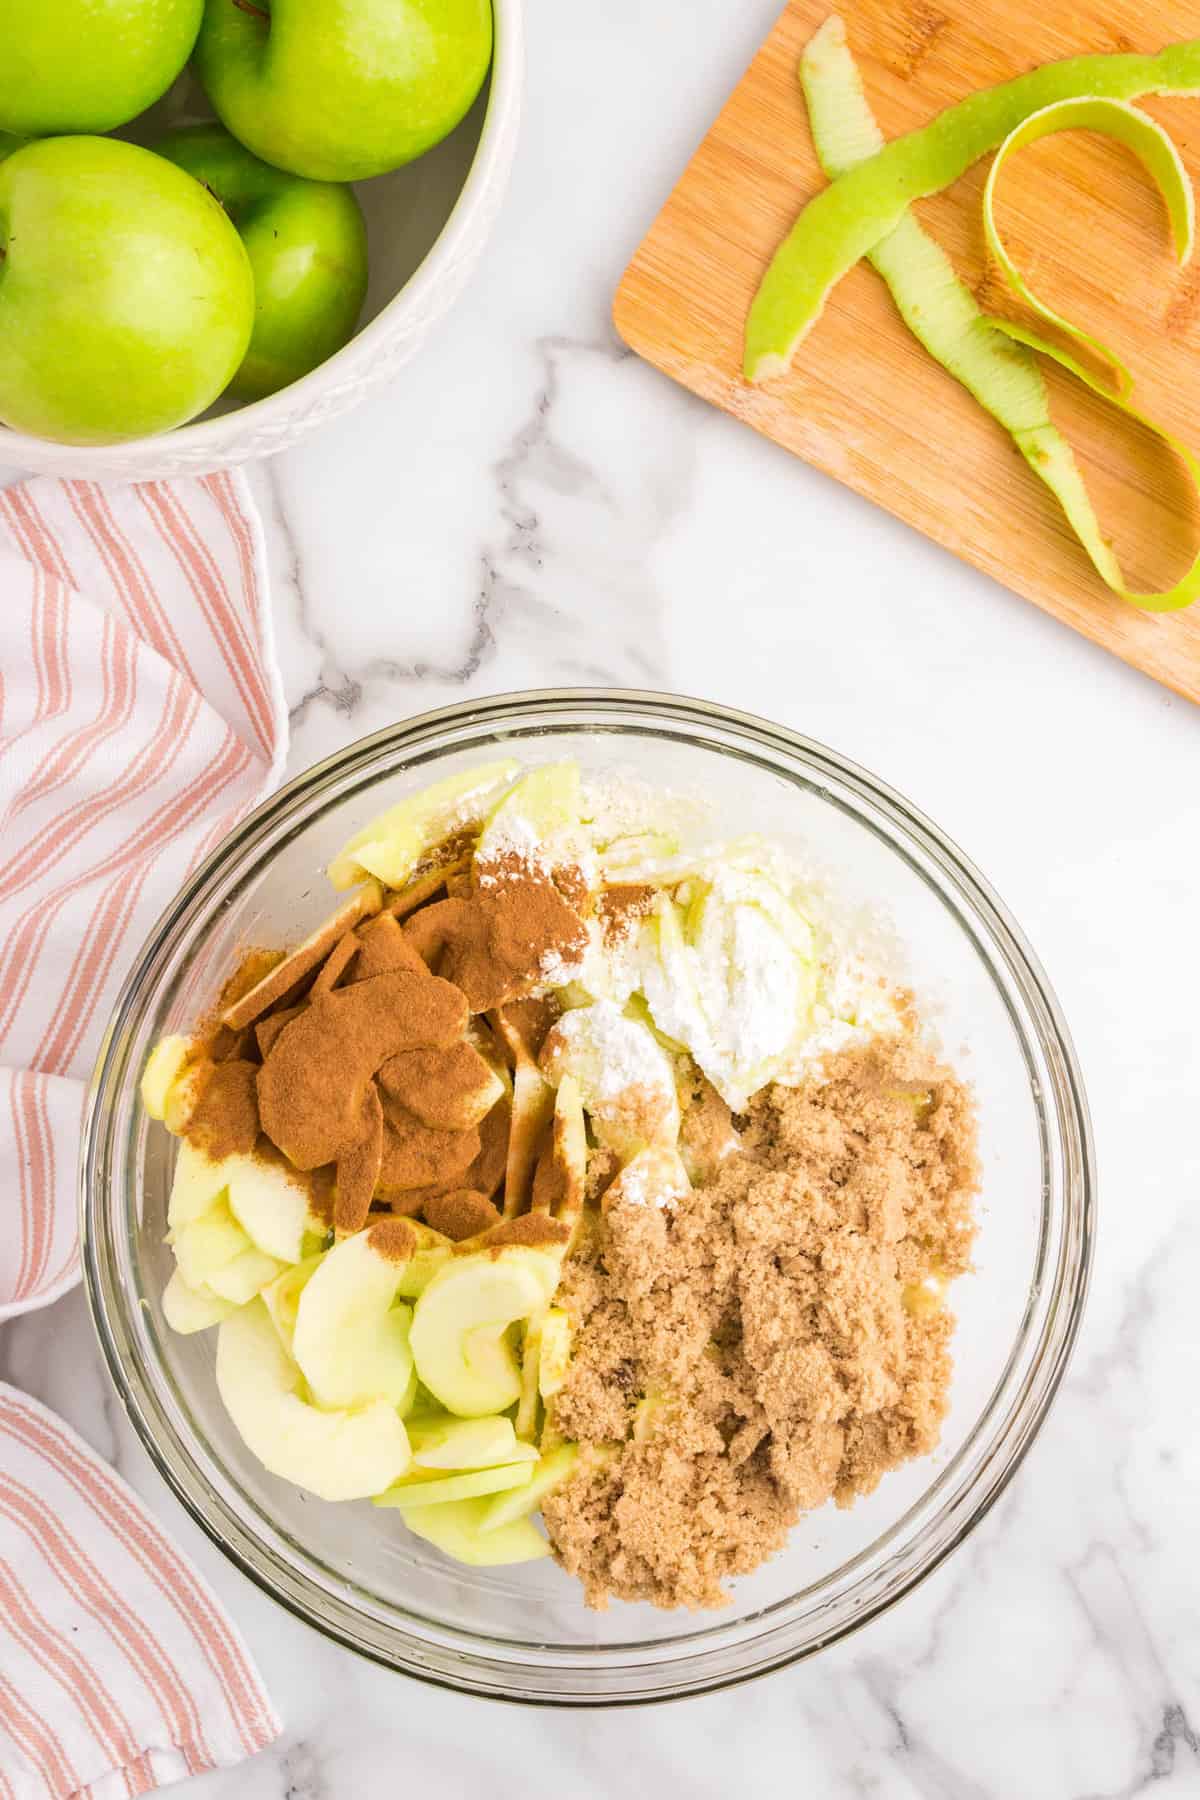 Tossing sliced granny smith apples in mixing bowl with spices for Apple Crumble recipe